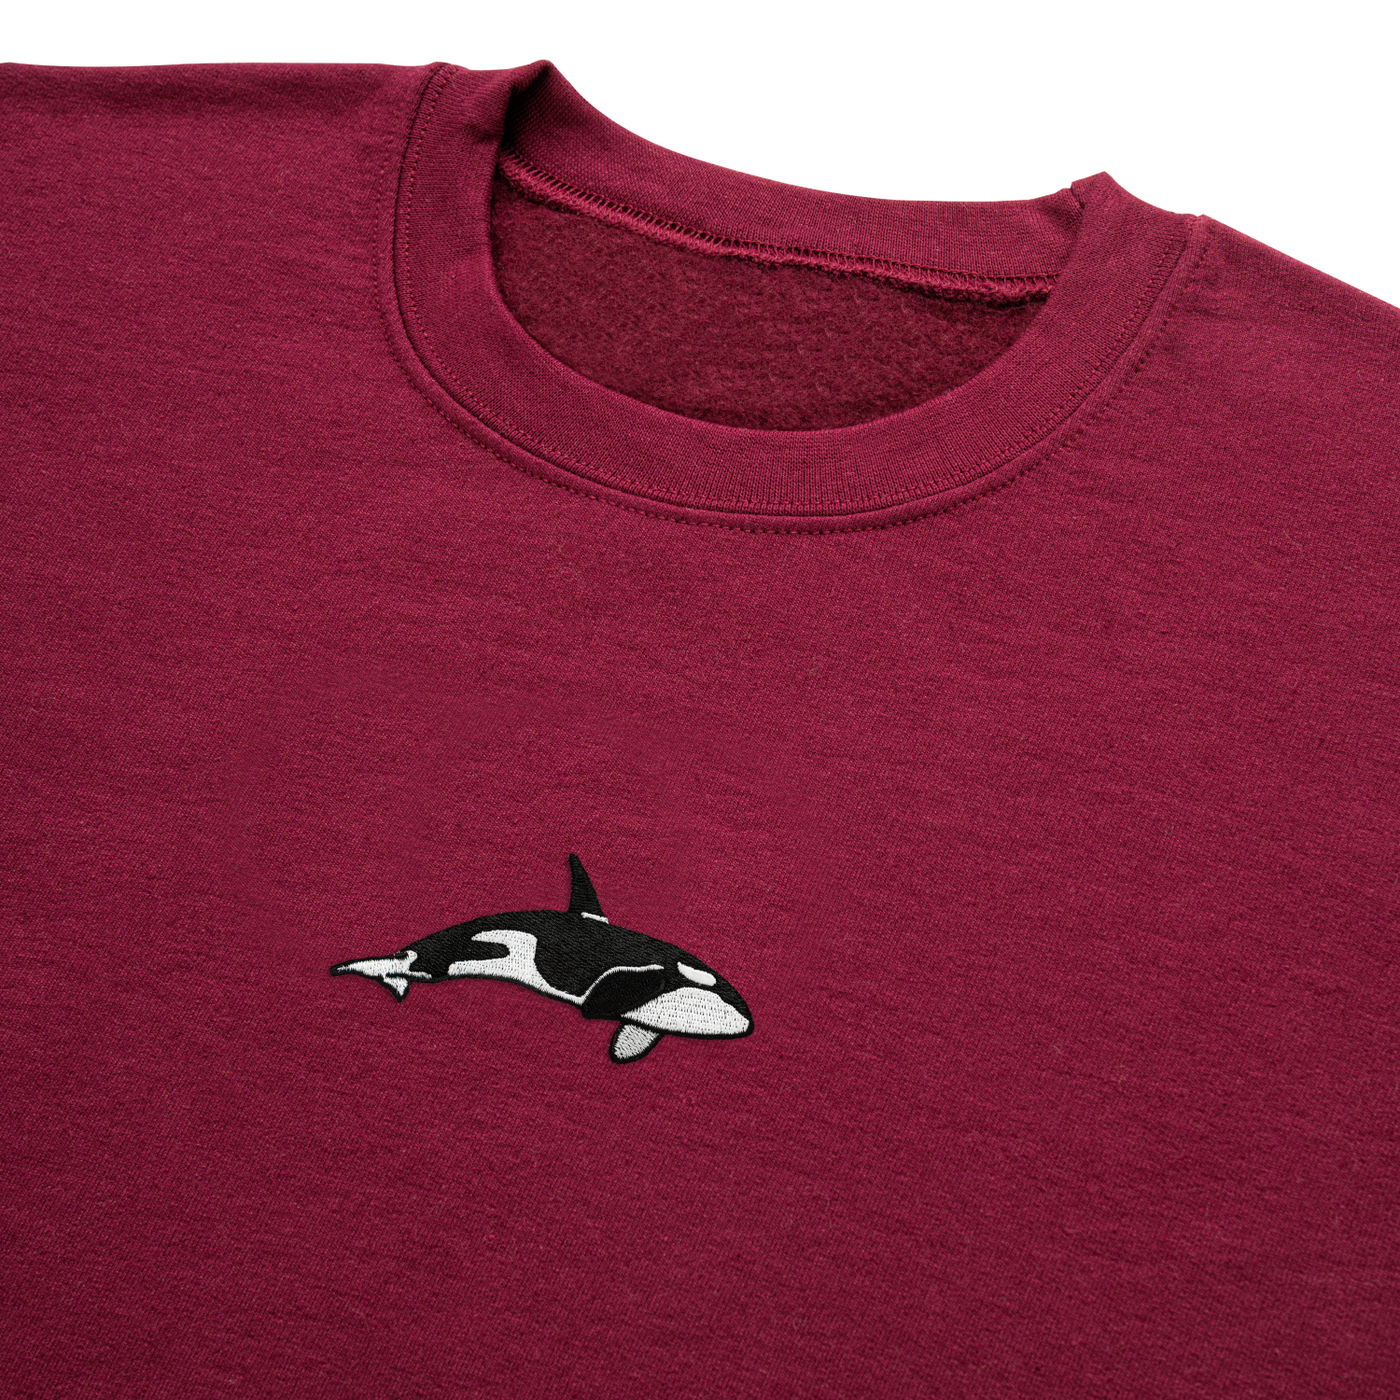 Bobby's Planet Men's Embroidered Orca Sweatshirt from Seven Seas Fish Animals Collection in Maroon Color#color_maroon